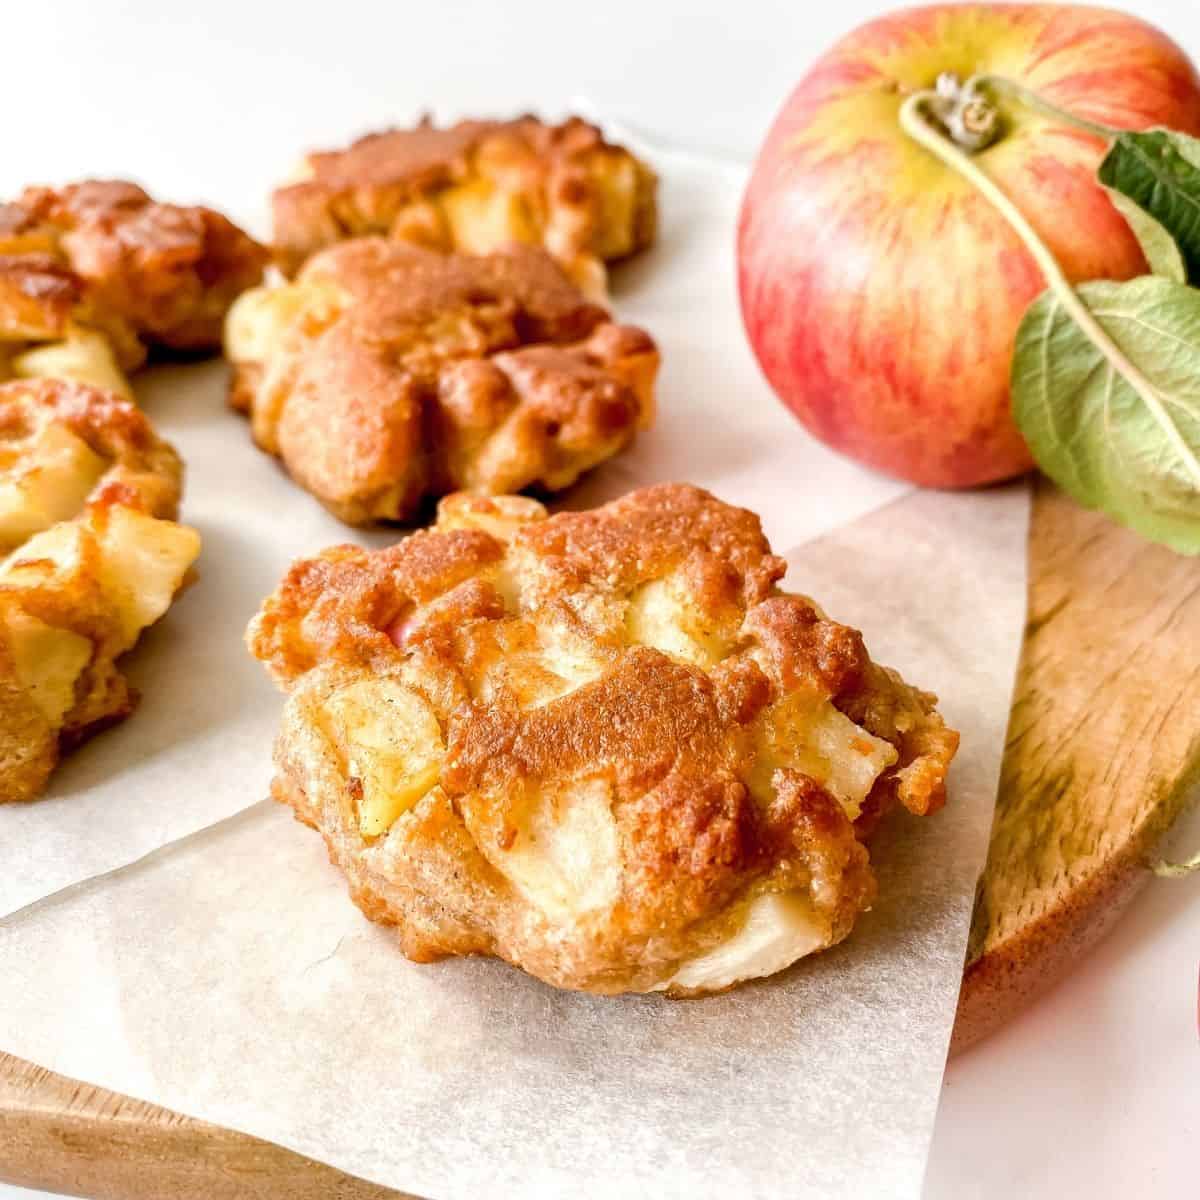 Cardamom Apple Fritters (sweetened with maple syrup)